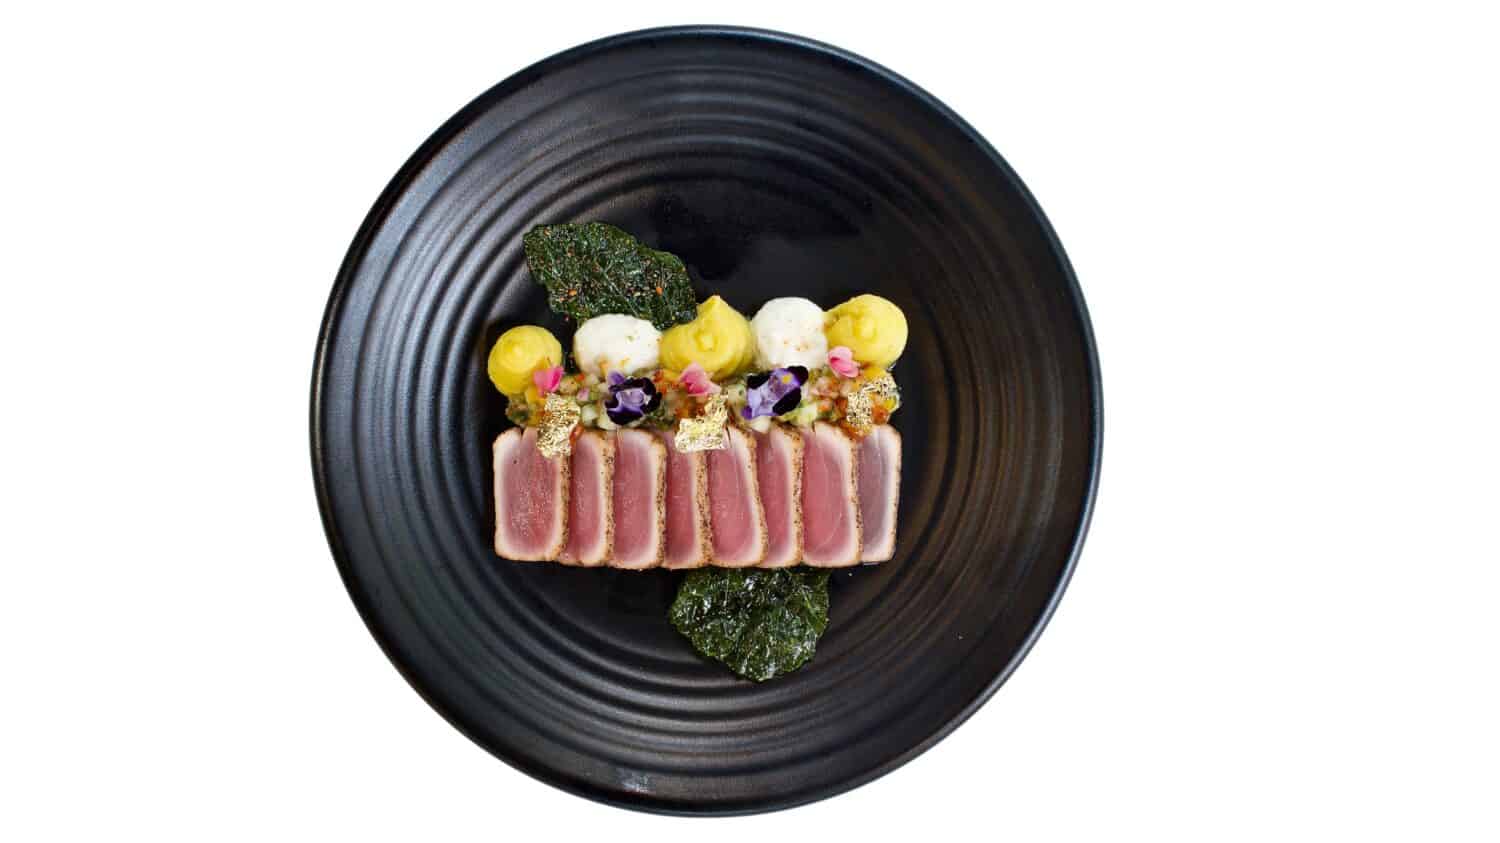 Top view of Tuna tataki on black plate,  Isolated on white background. Japanese food.